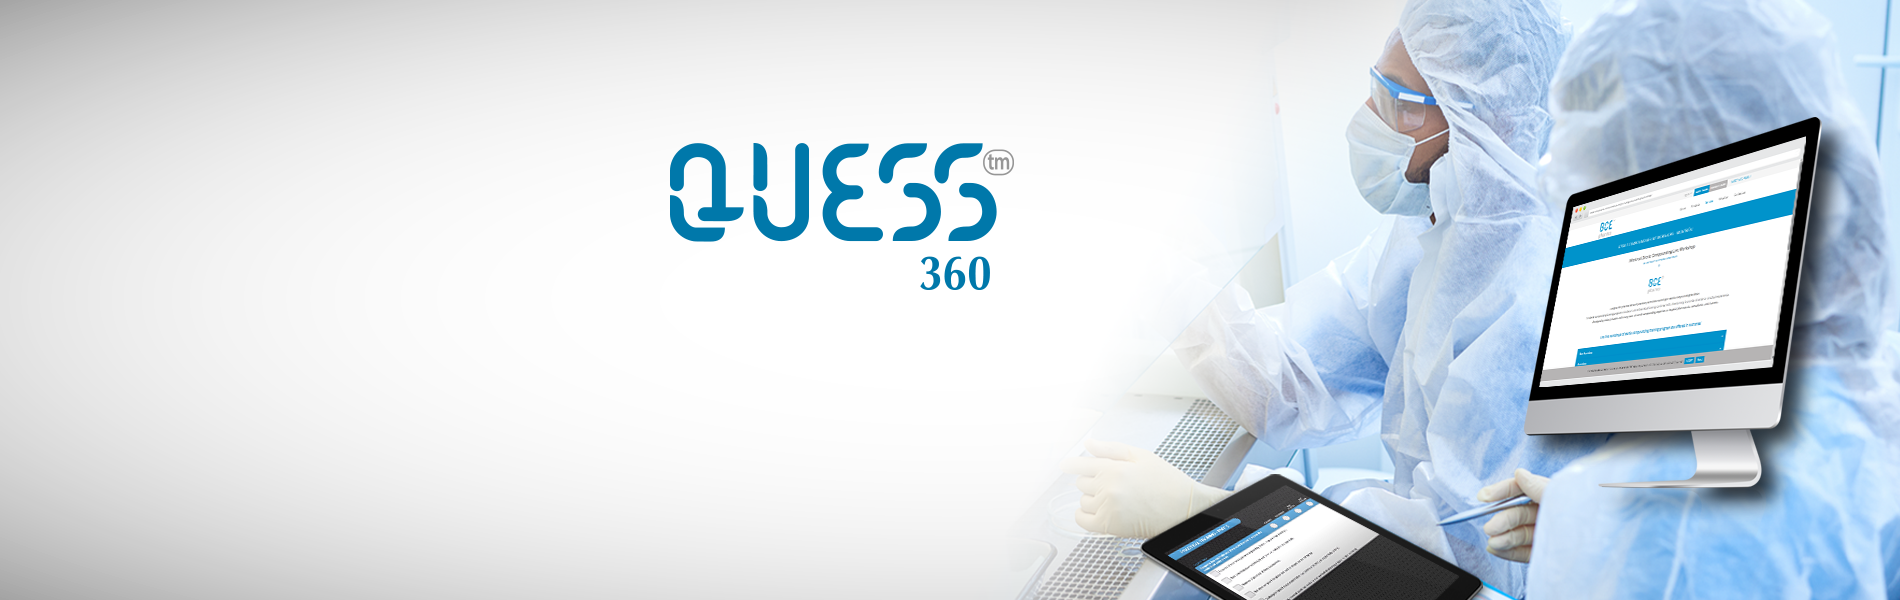 Quess Corp Limited | CakeResume